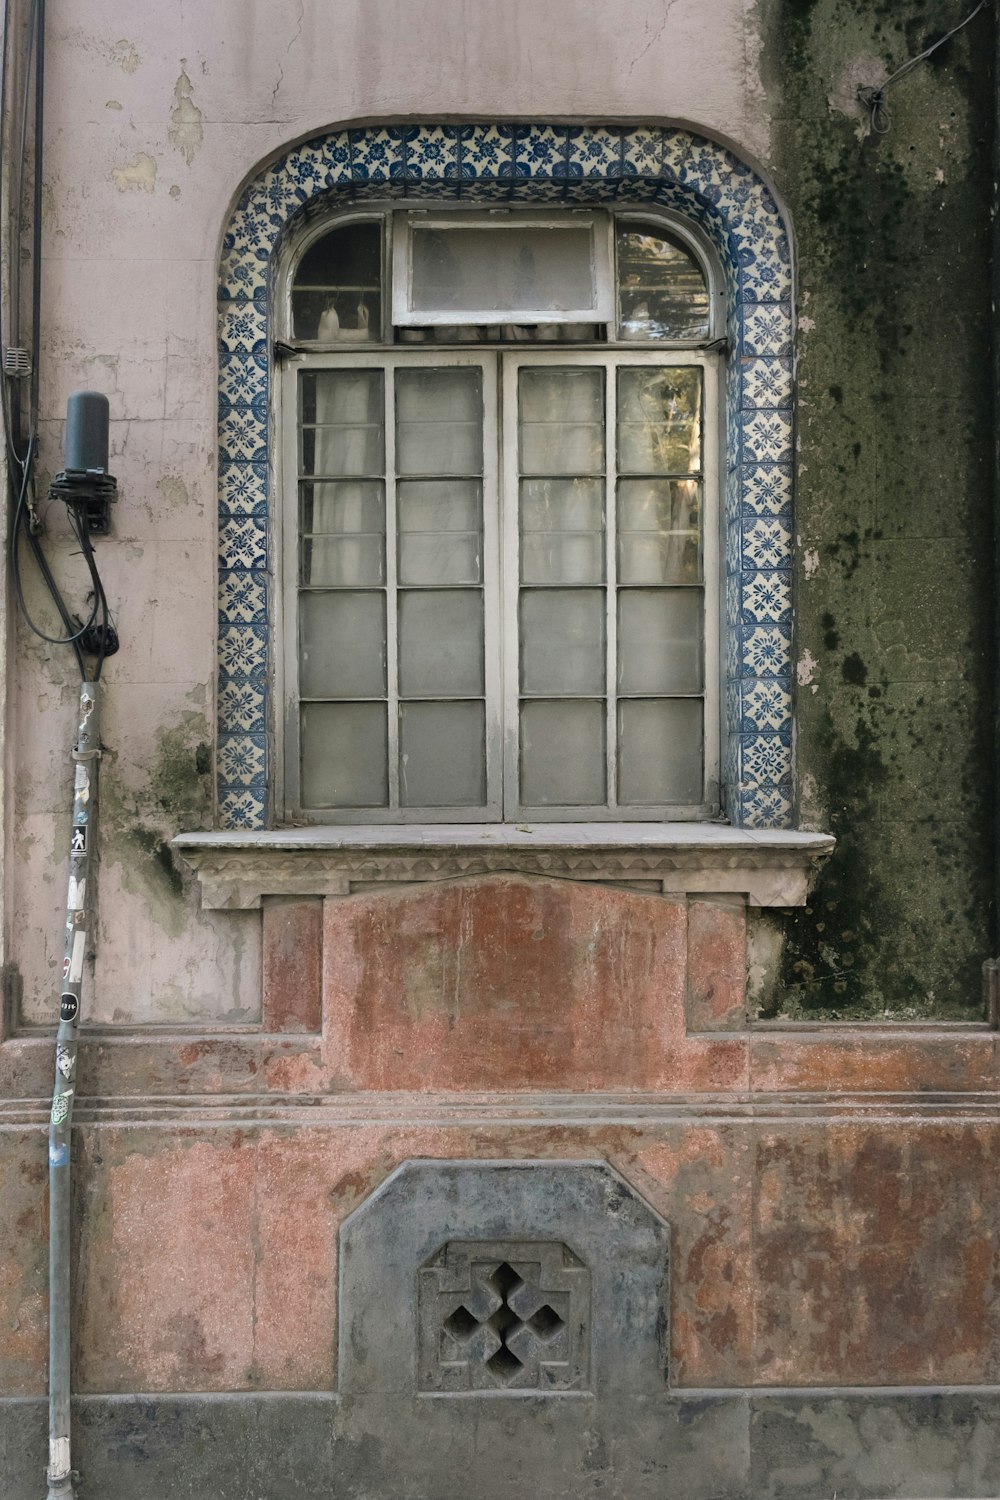 an old building with a window and a hose attached to it